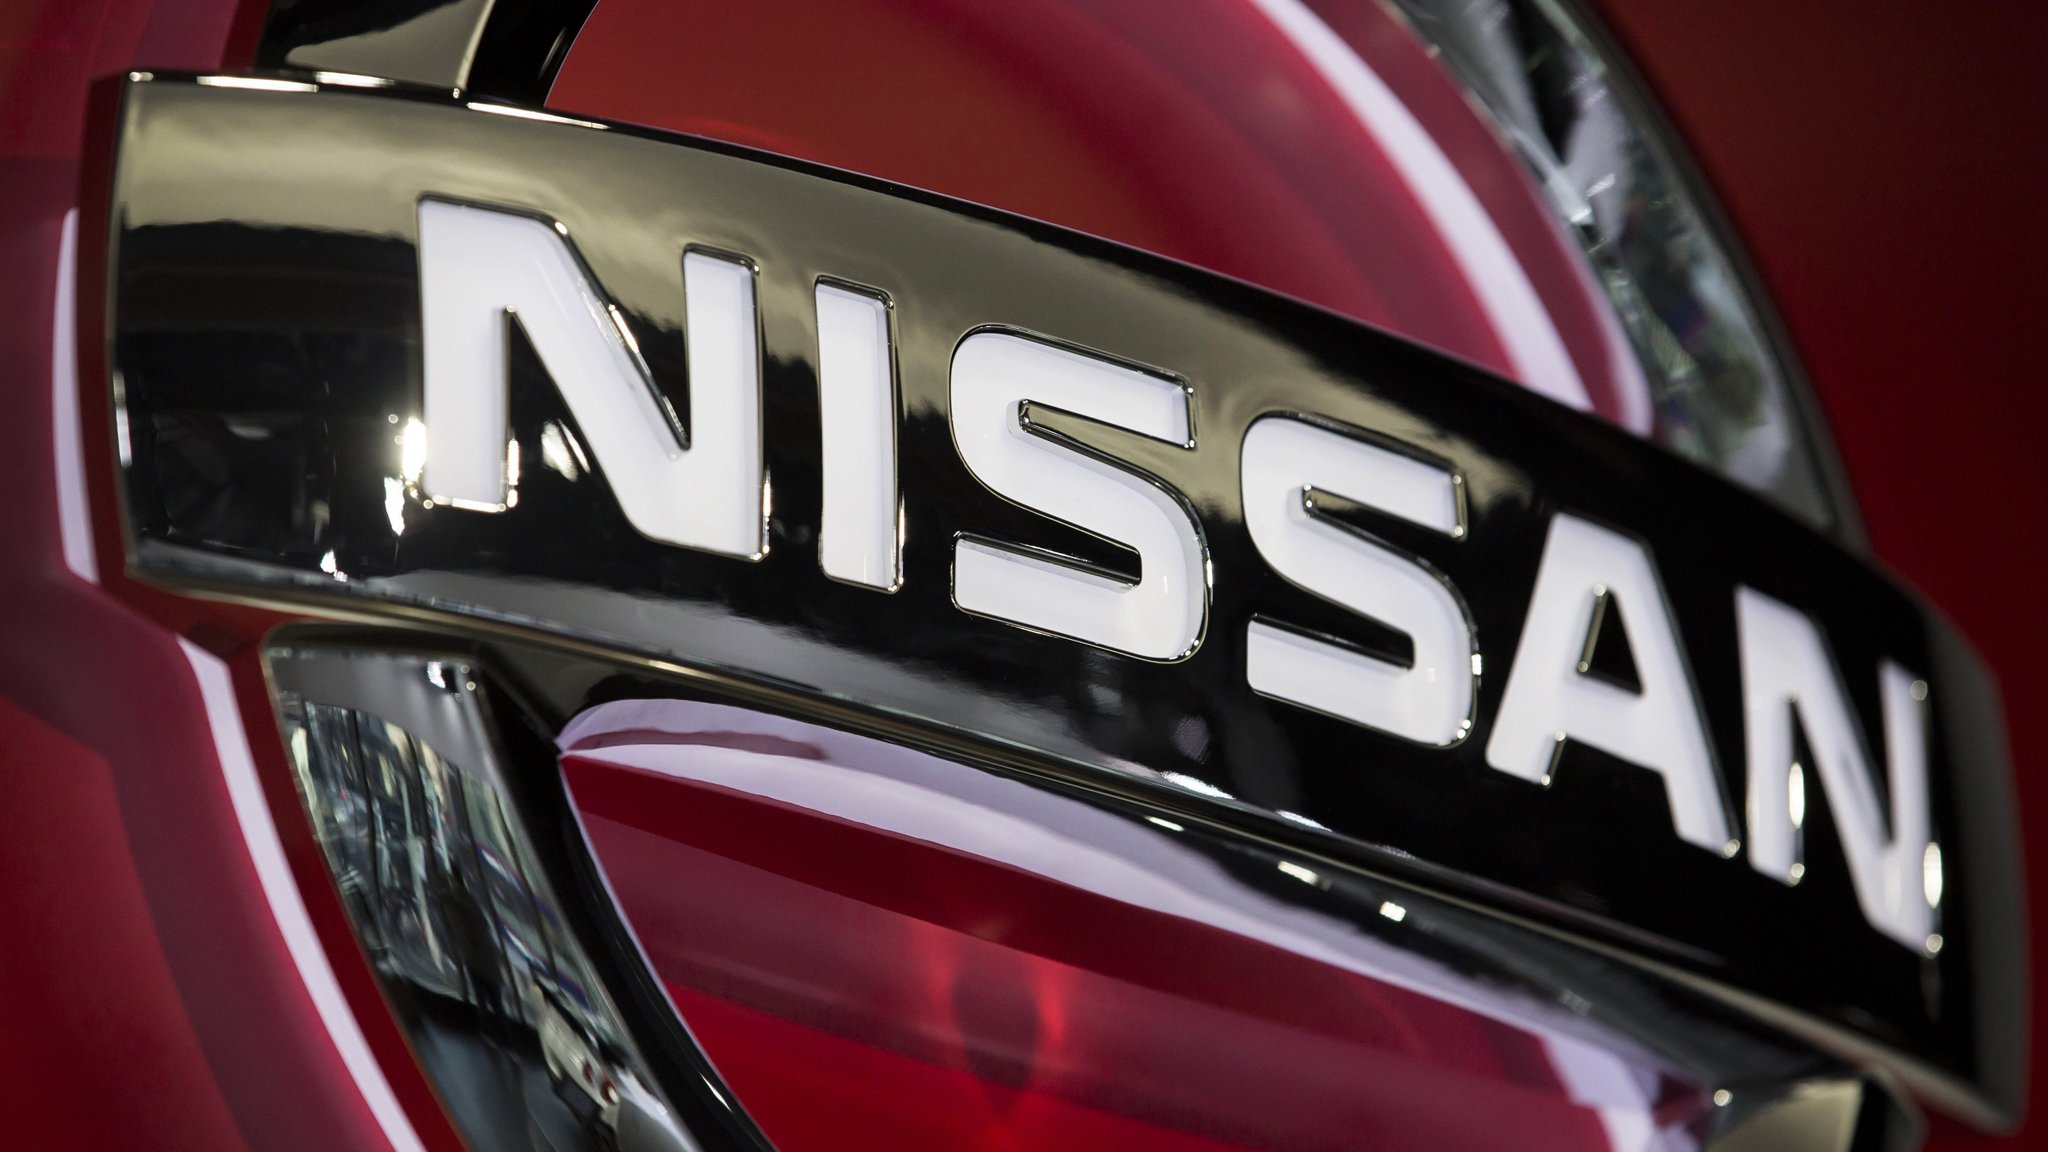 Nissan Cancels Funding For UK Plant Amidst Brexit Disaster